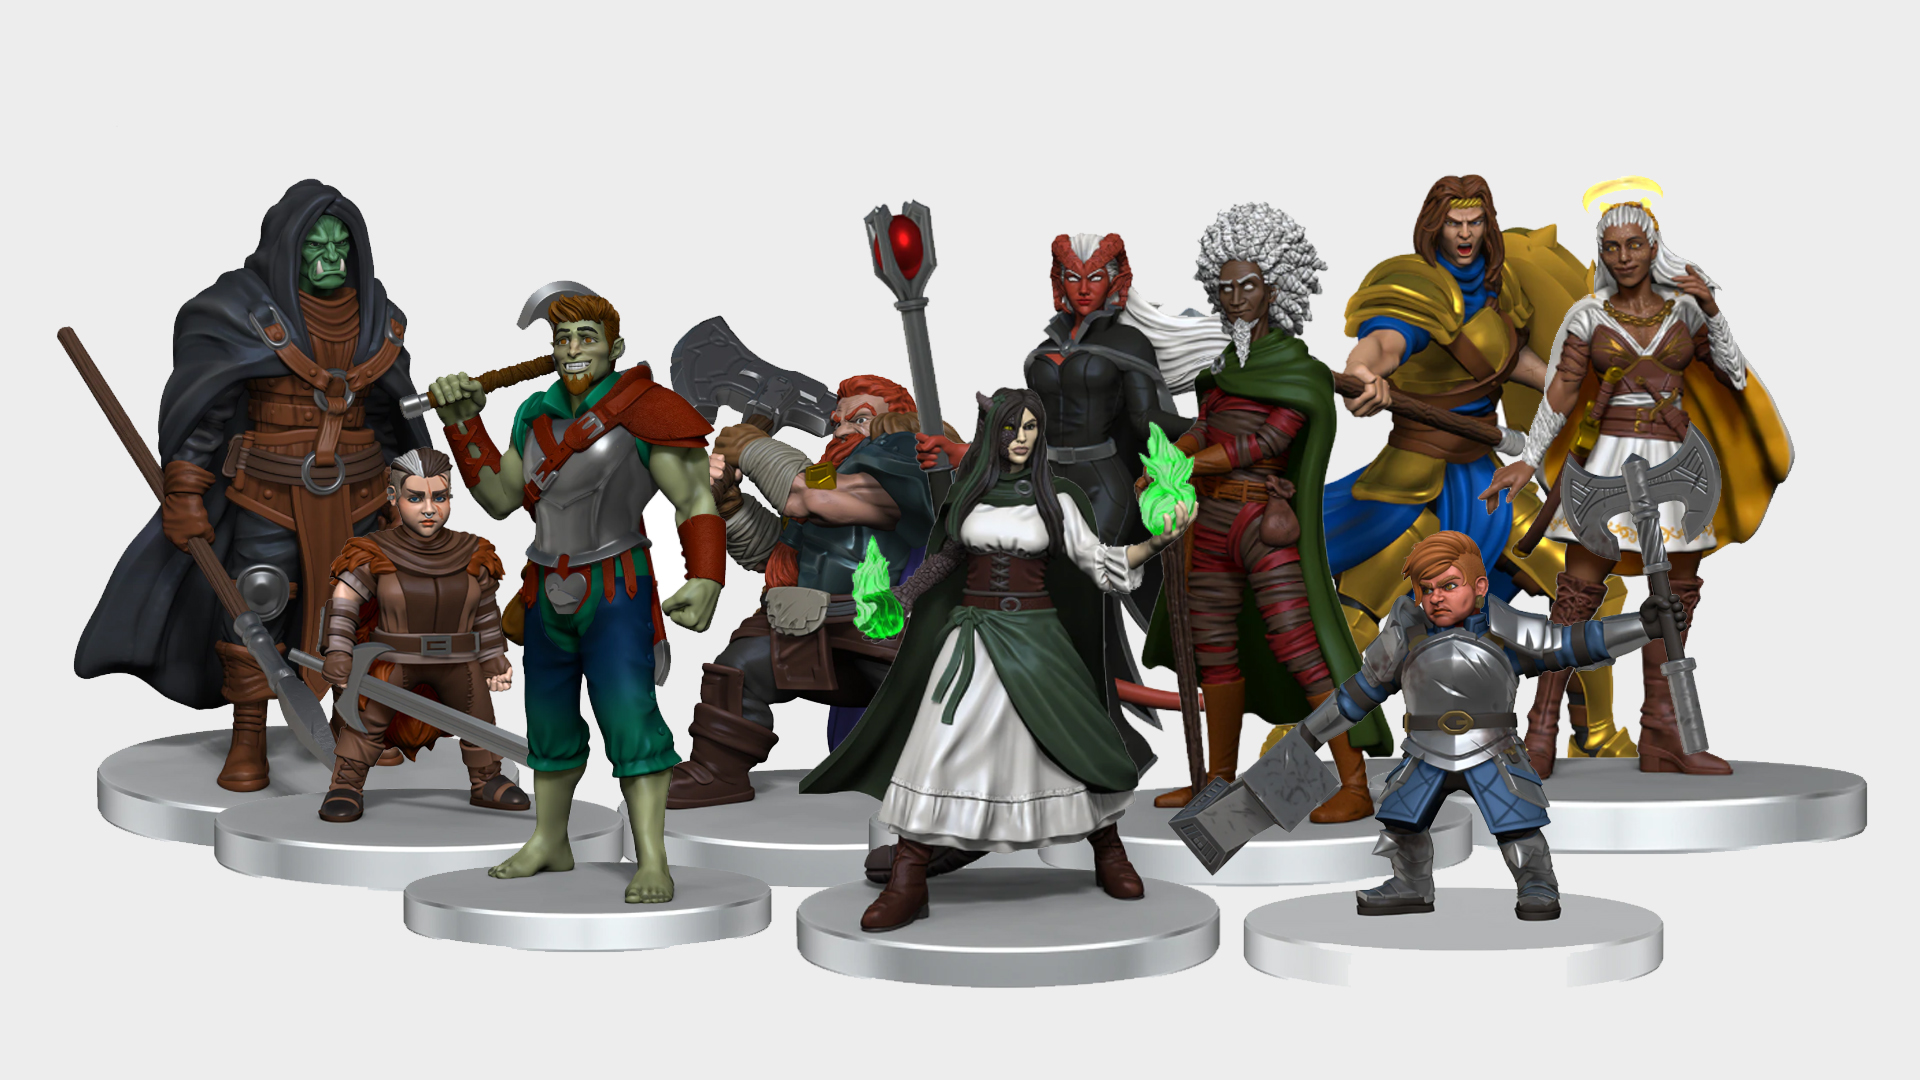 New Critical Role miniatures include the show's biggest villains